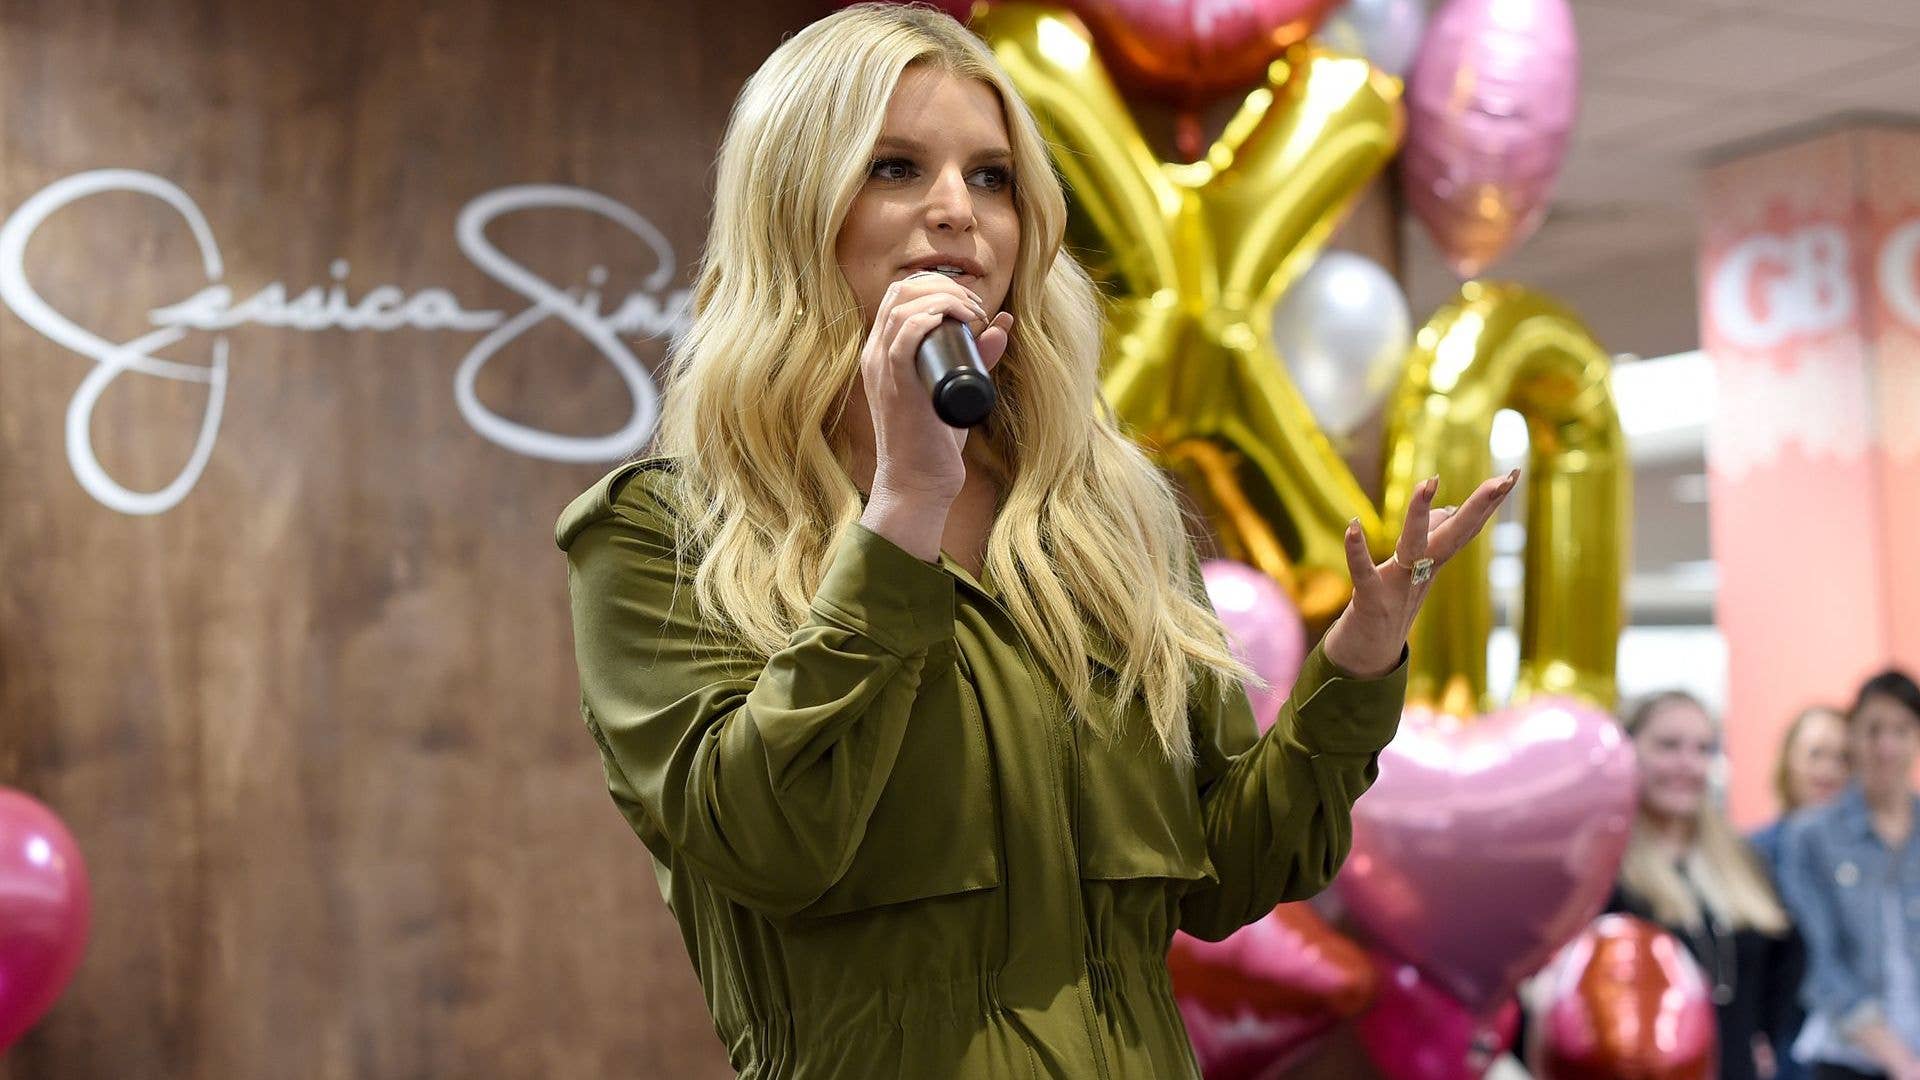 jessica simpson speaking at an event.